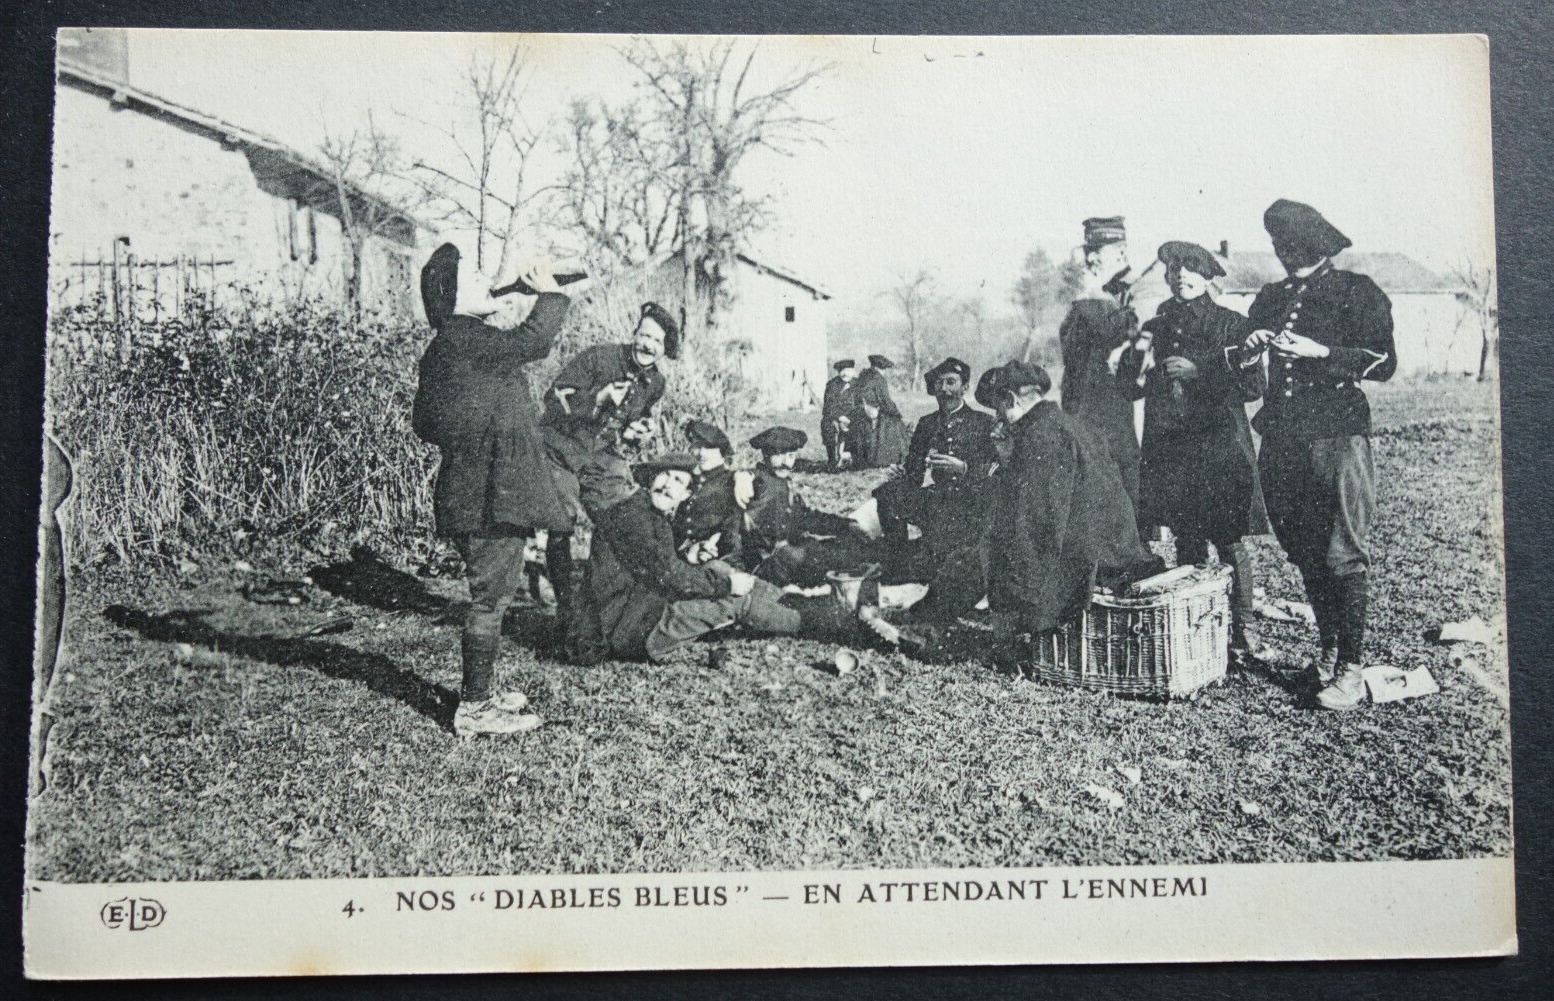 Our Blue Devils - Waiting for the enemy WW1 postcard (4)